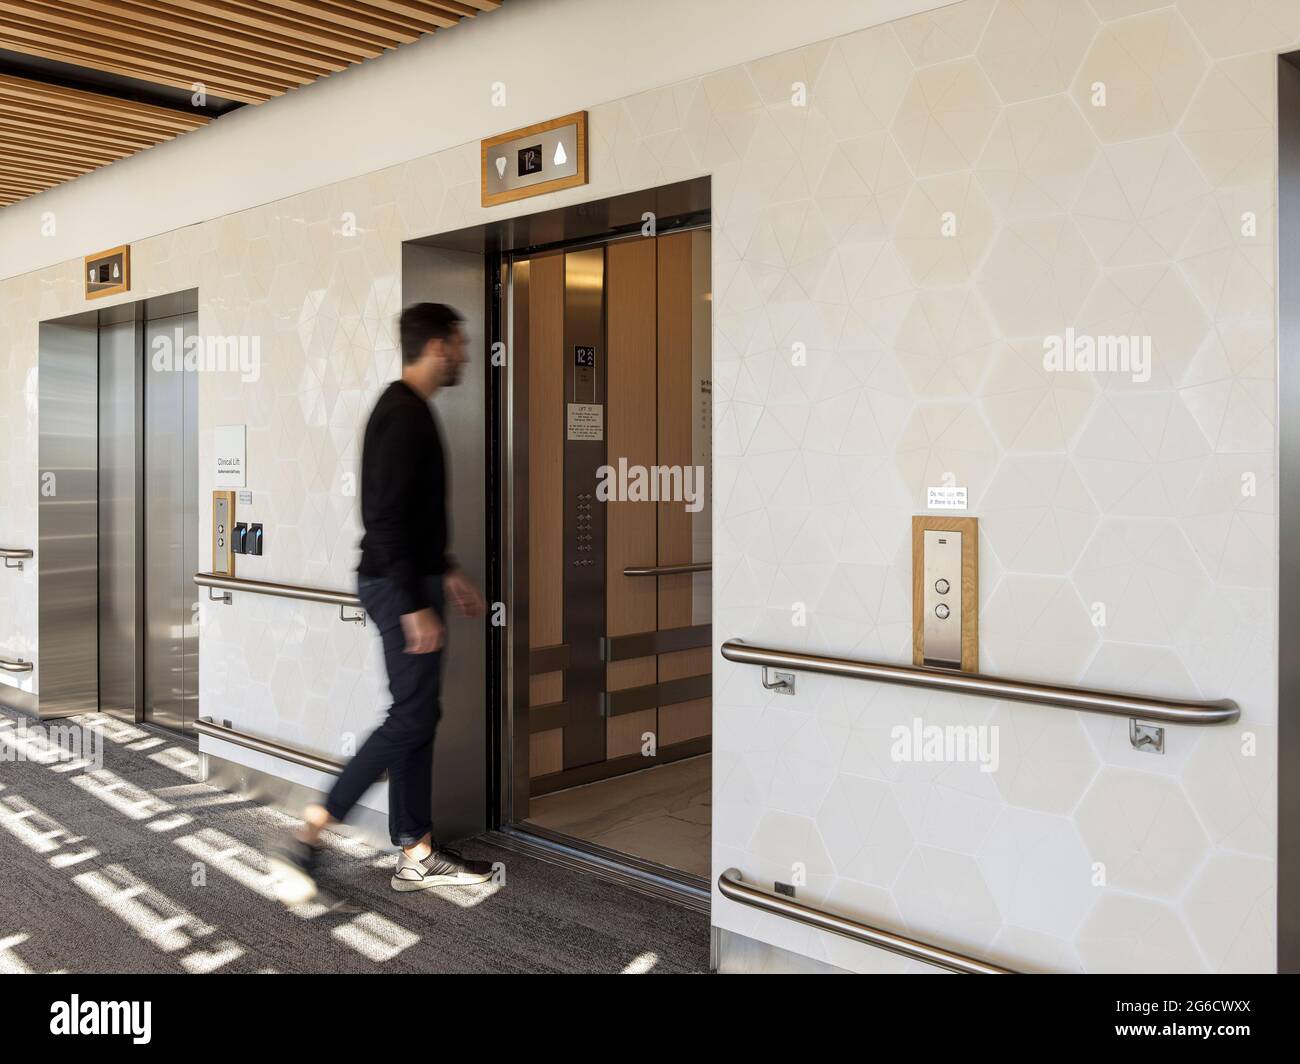 Typical lift lobby. St Vincents Private Hospital, Darlinghurst, Australia. Architect: HASSELL, 2021. Stock Photo